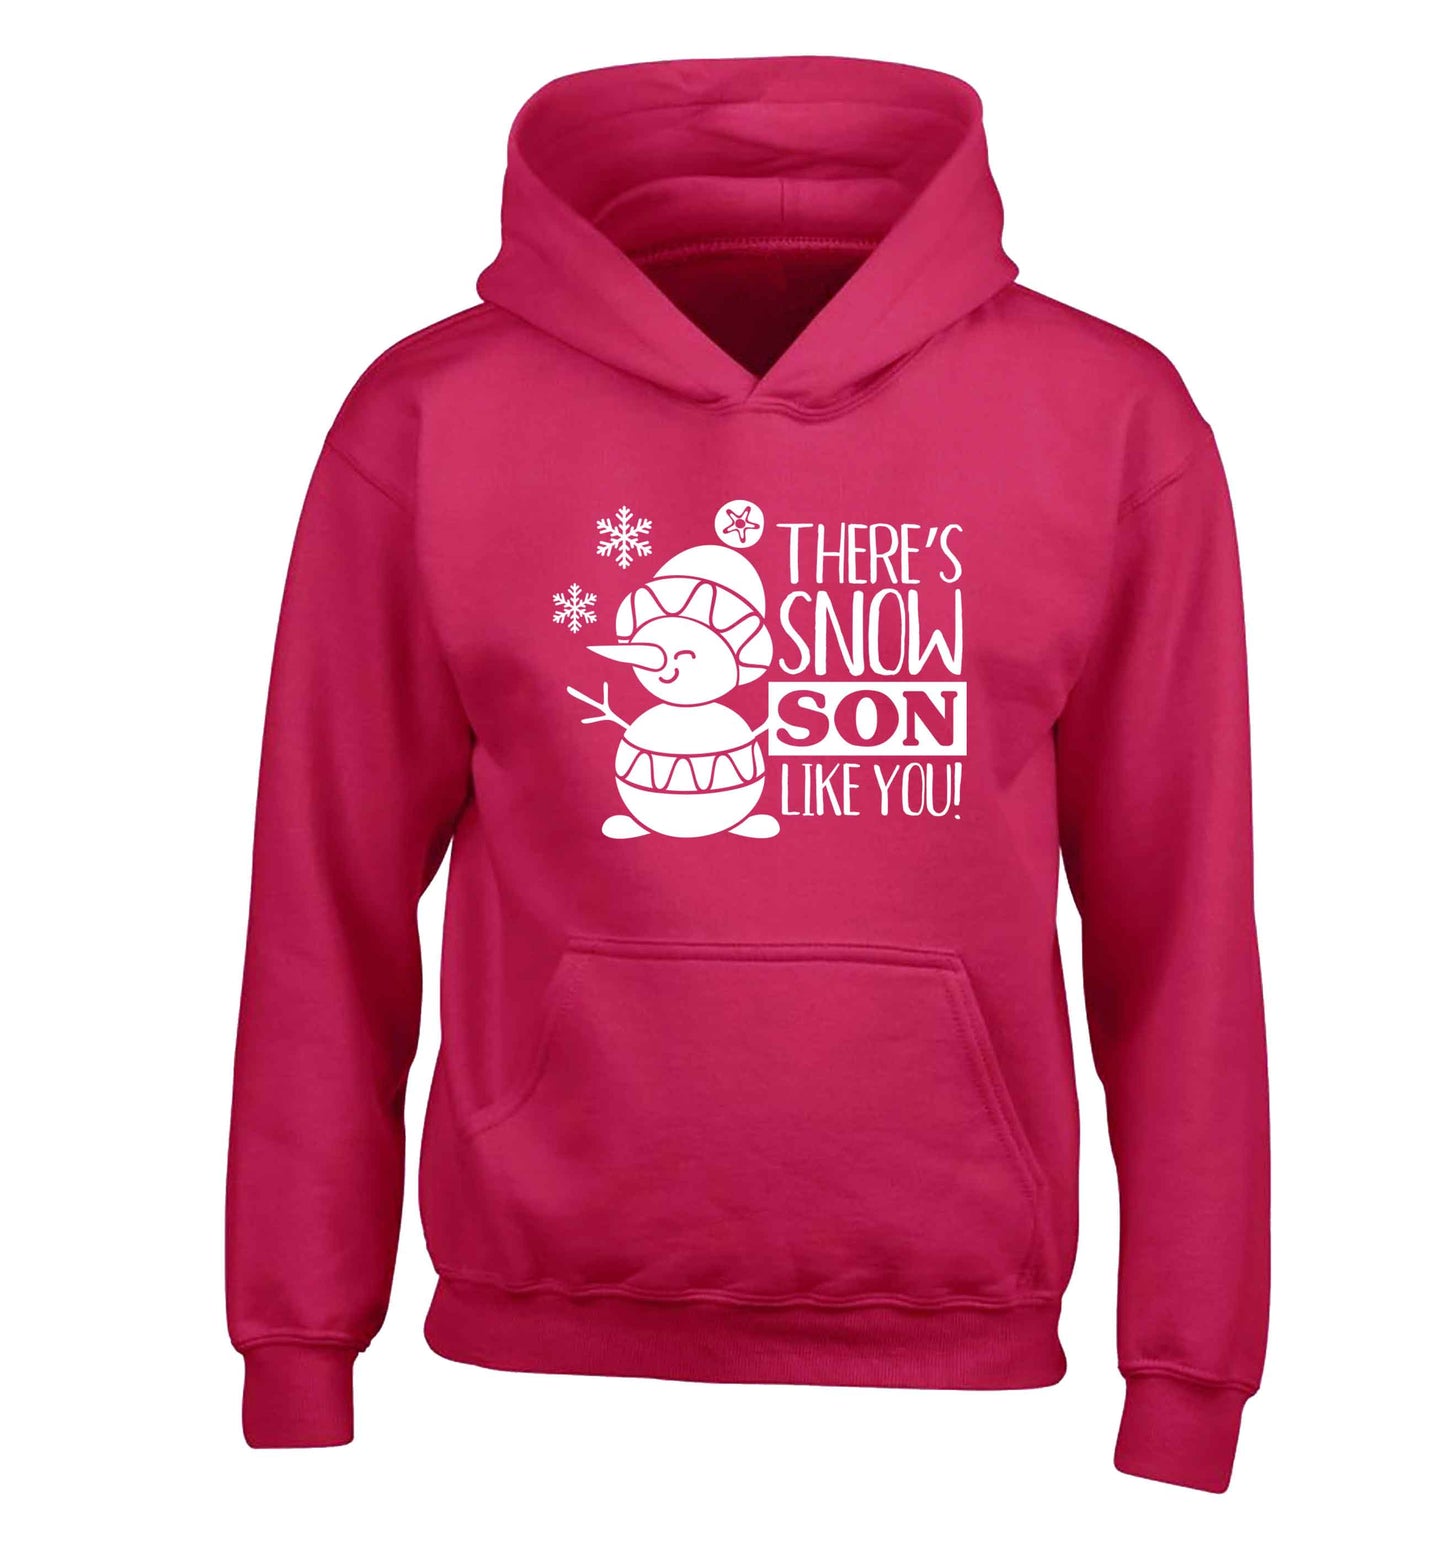 There's snow son like you children's pink hoodie 12-13 Years